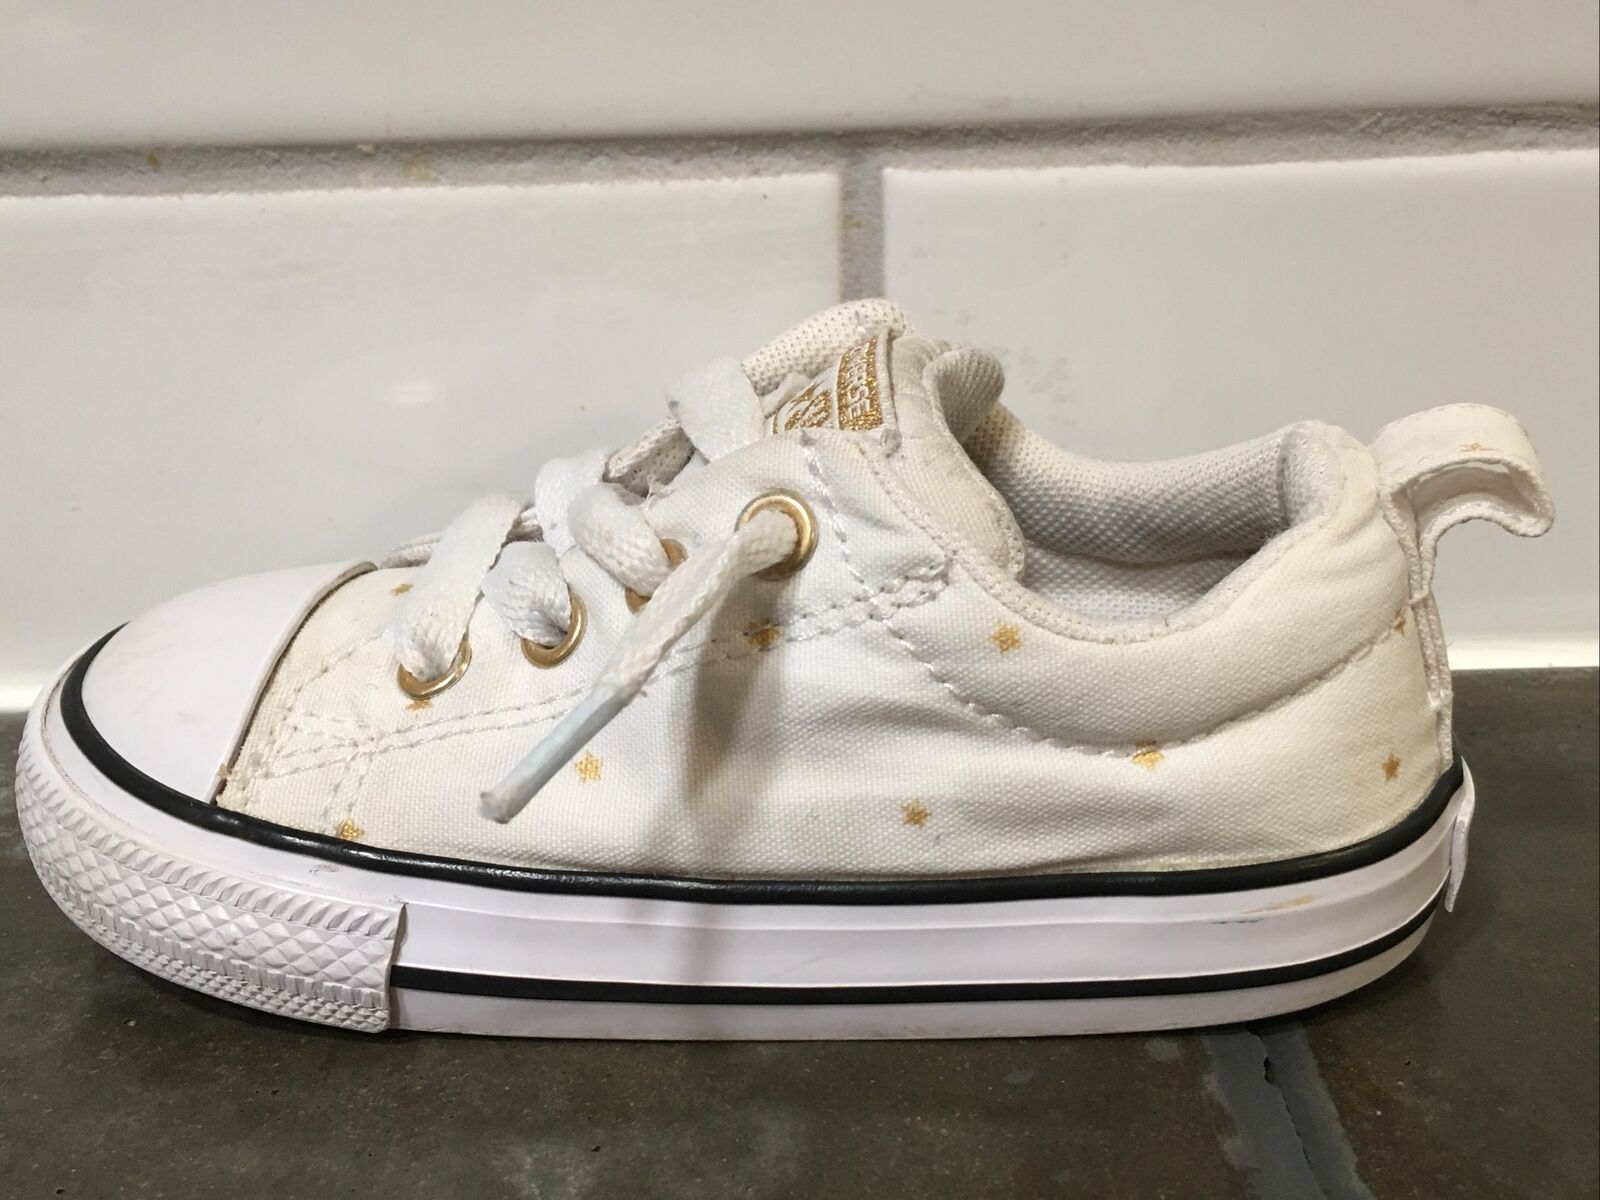 Toddler girls Converse All Star shoes size 7, white with gold stars